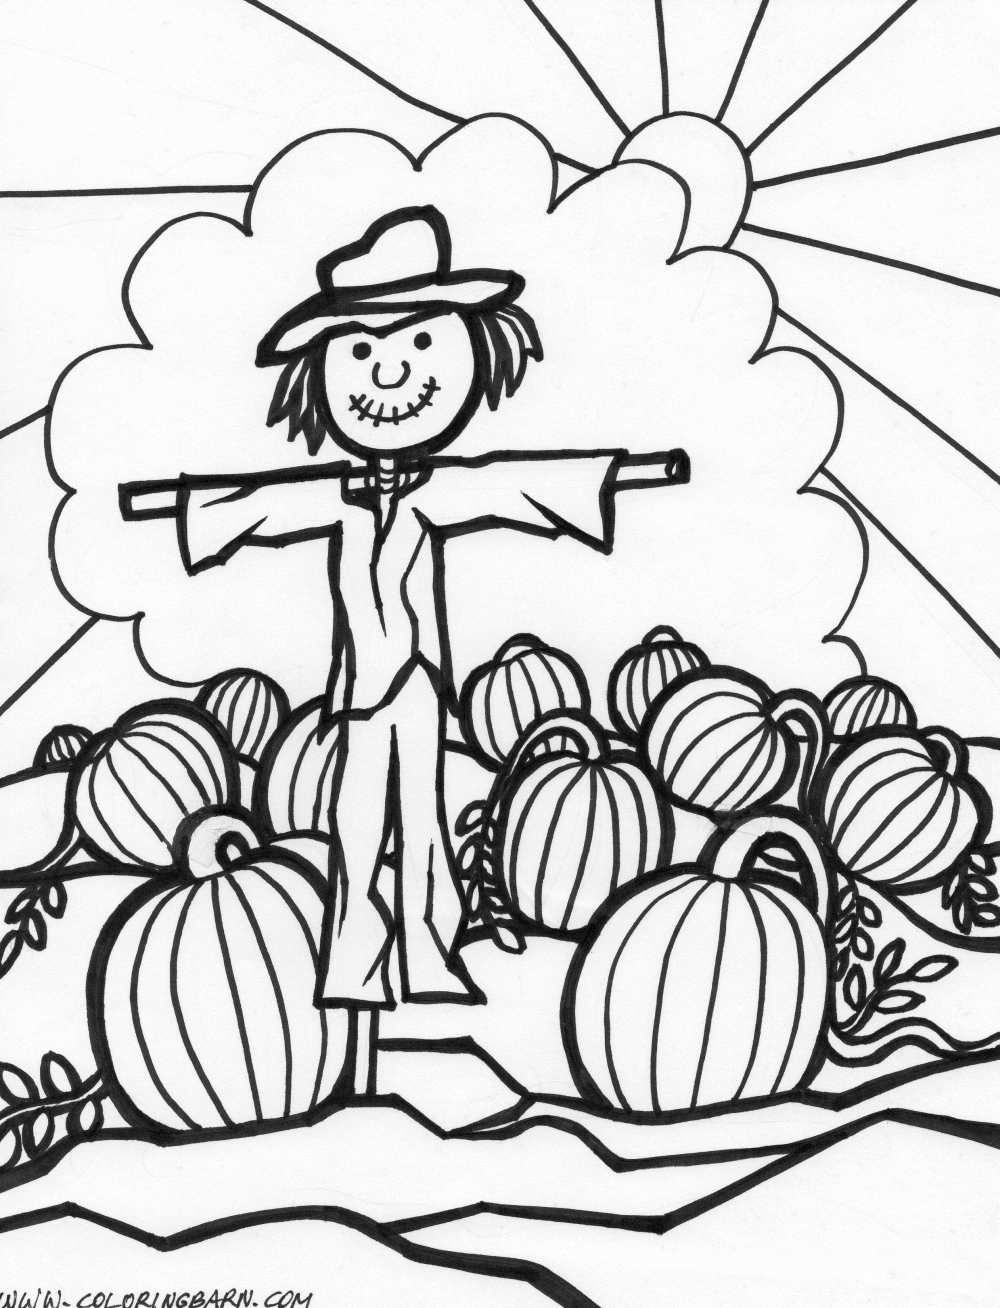 pumpkin-patch-coloring-page-disney-coloring-pages